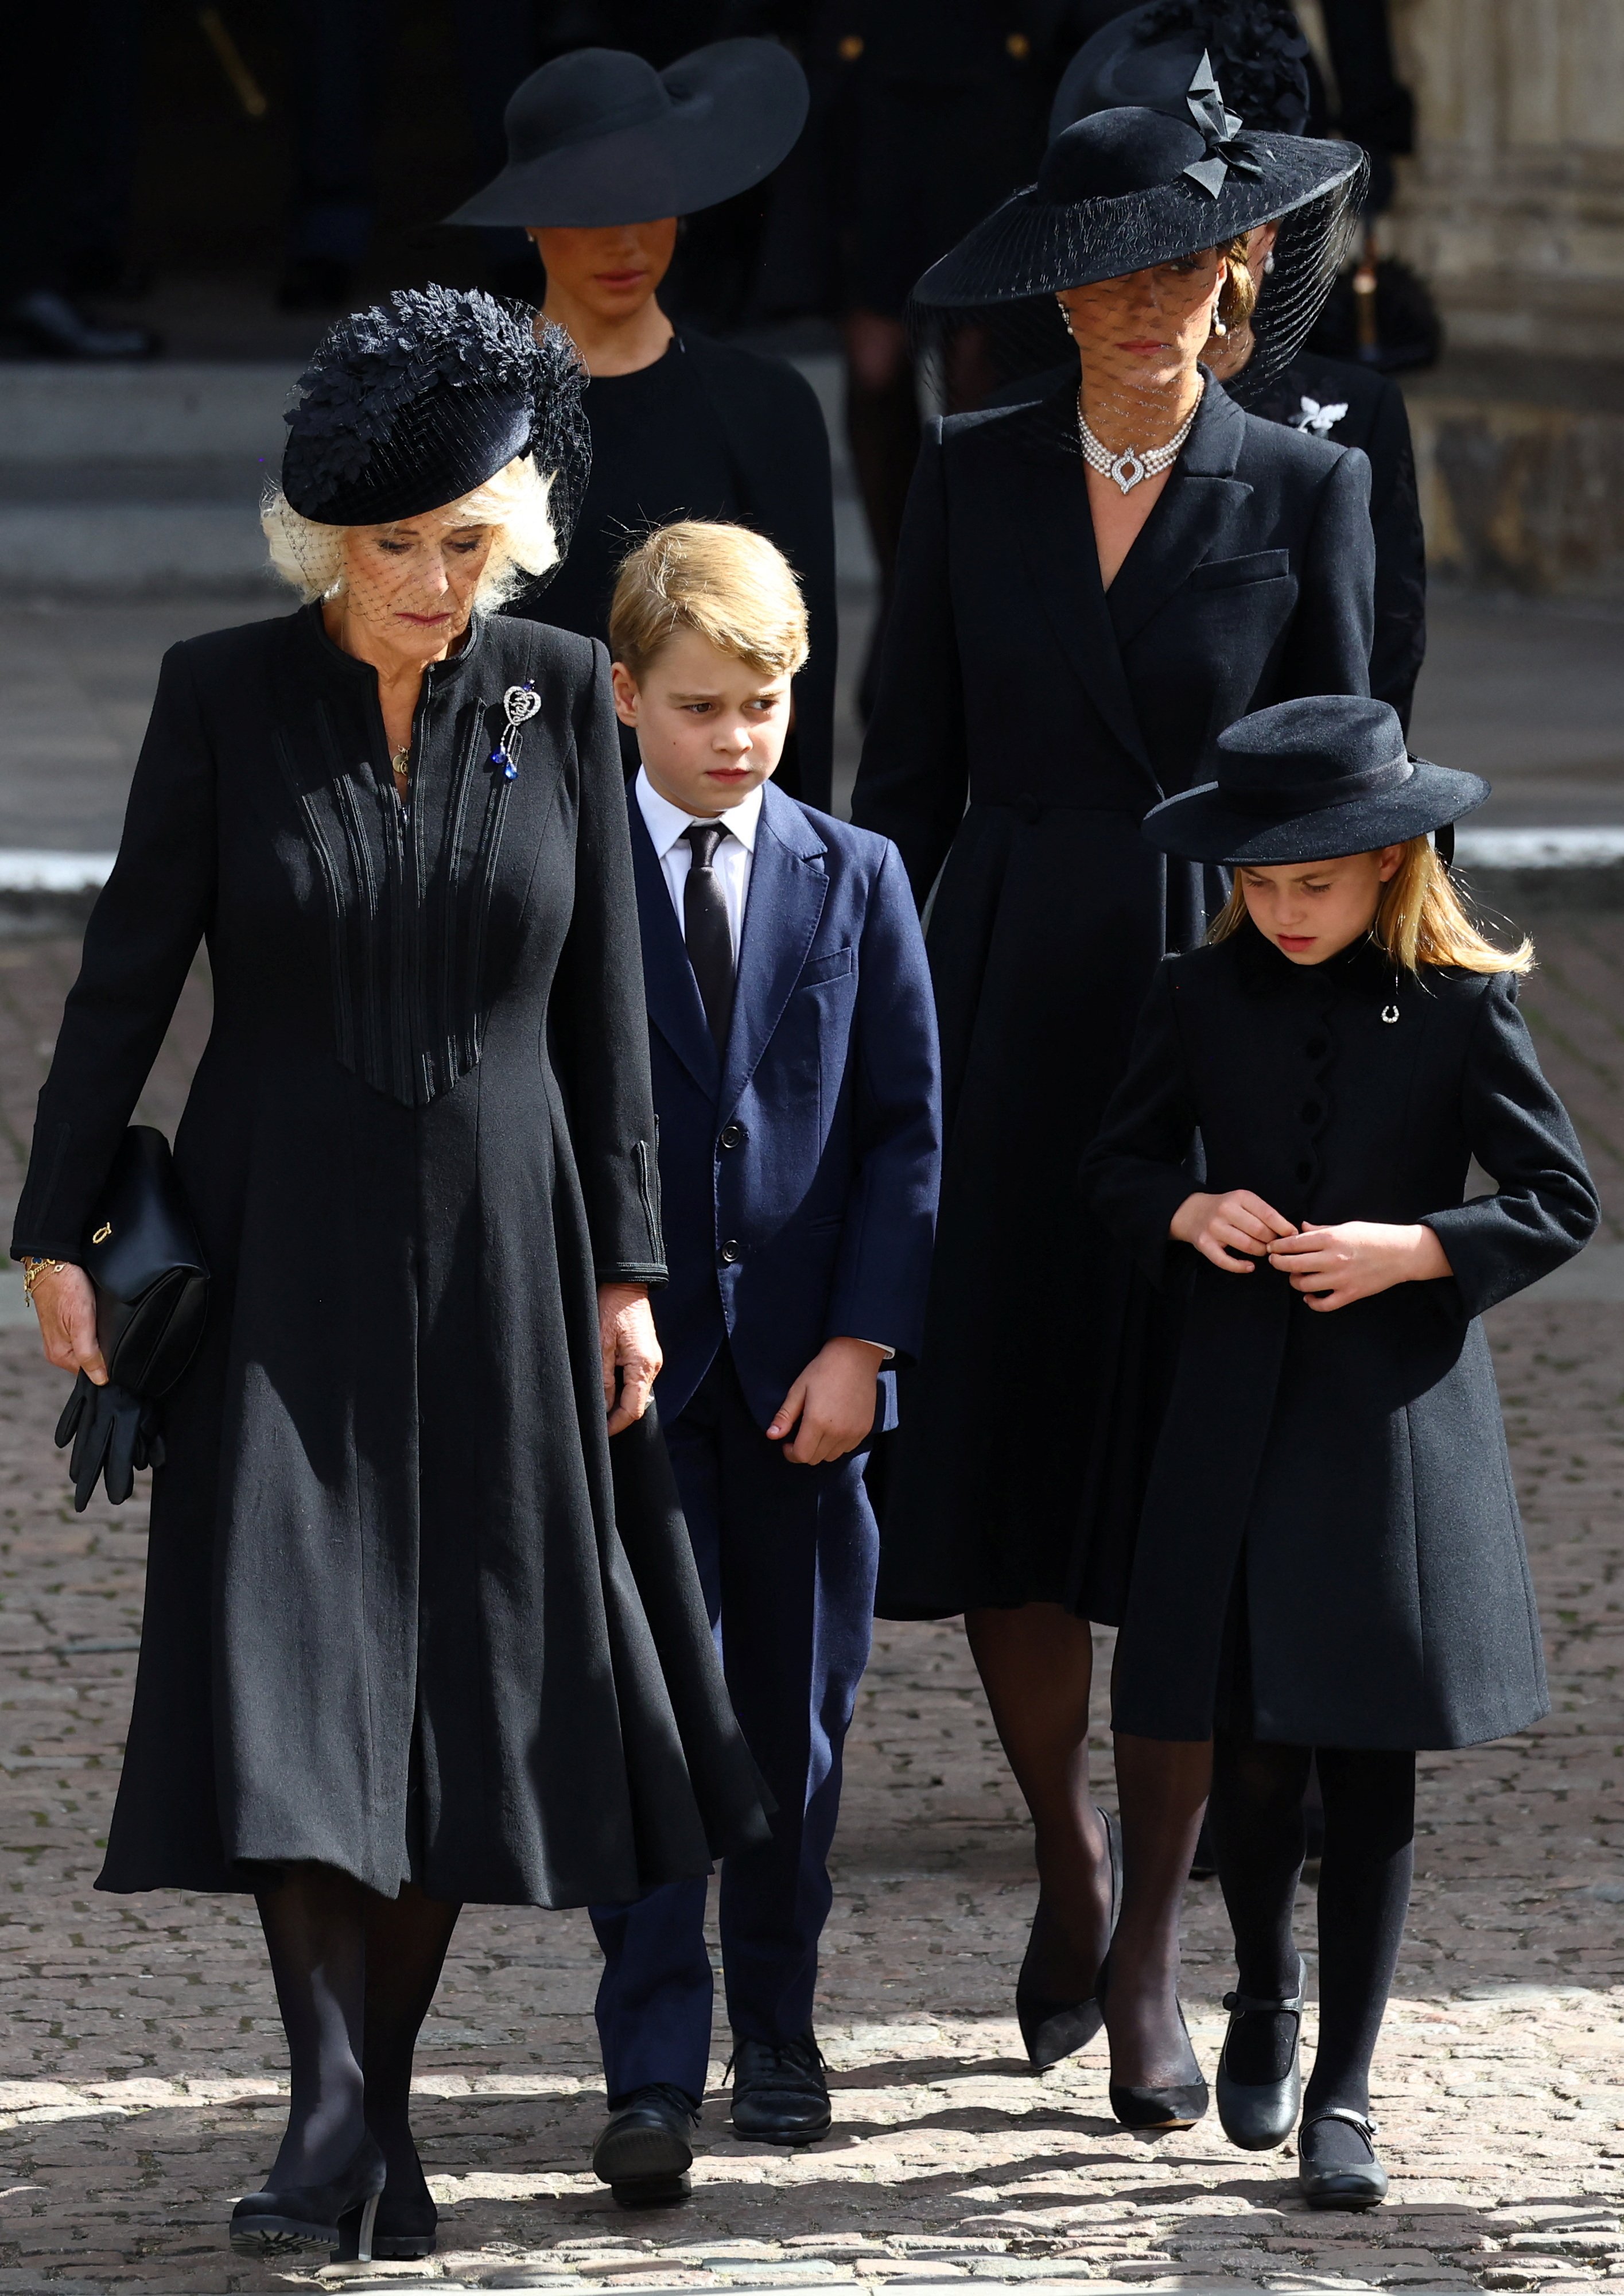 Camilla, Queen Consort, Prince George, Princess Charlotte, Catherine, Princess of Wales, and Meghan, Duchess of Sussex during the State Funeral of Queen Elizabeth II at Westminster Abbey on September 19, 2022, in London, England. | Source: Getty Images